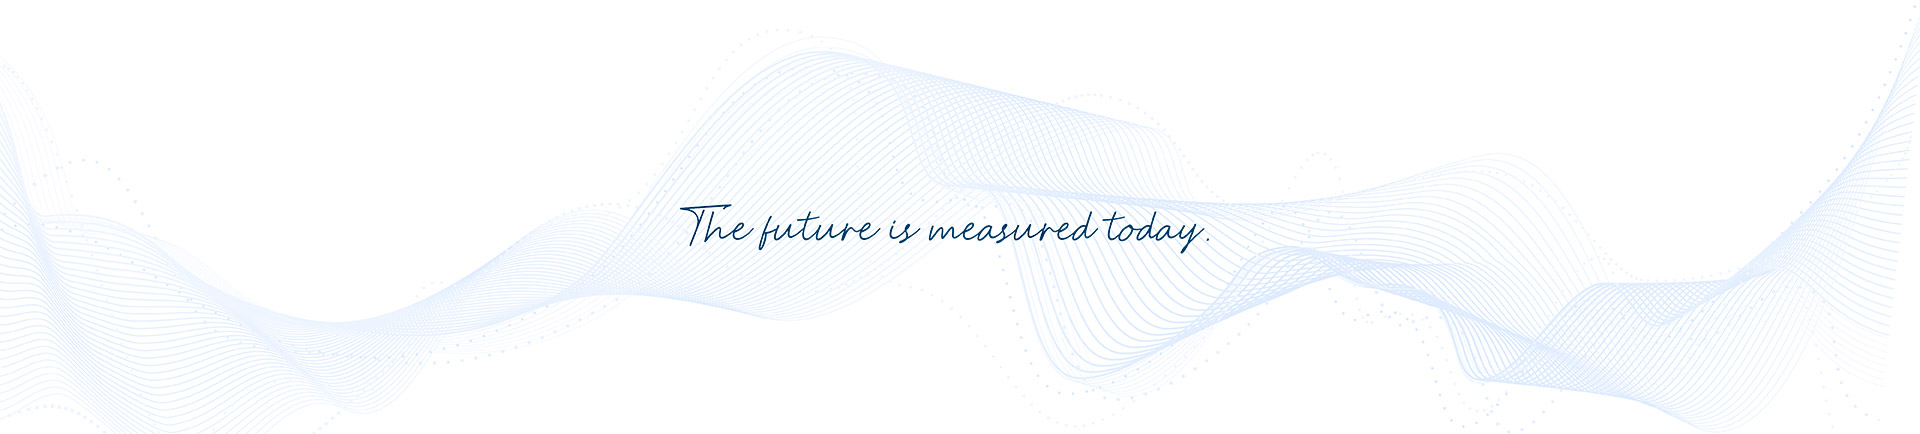 The future is measured today